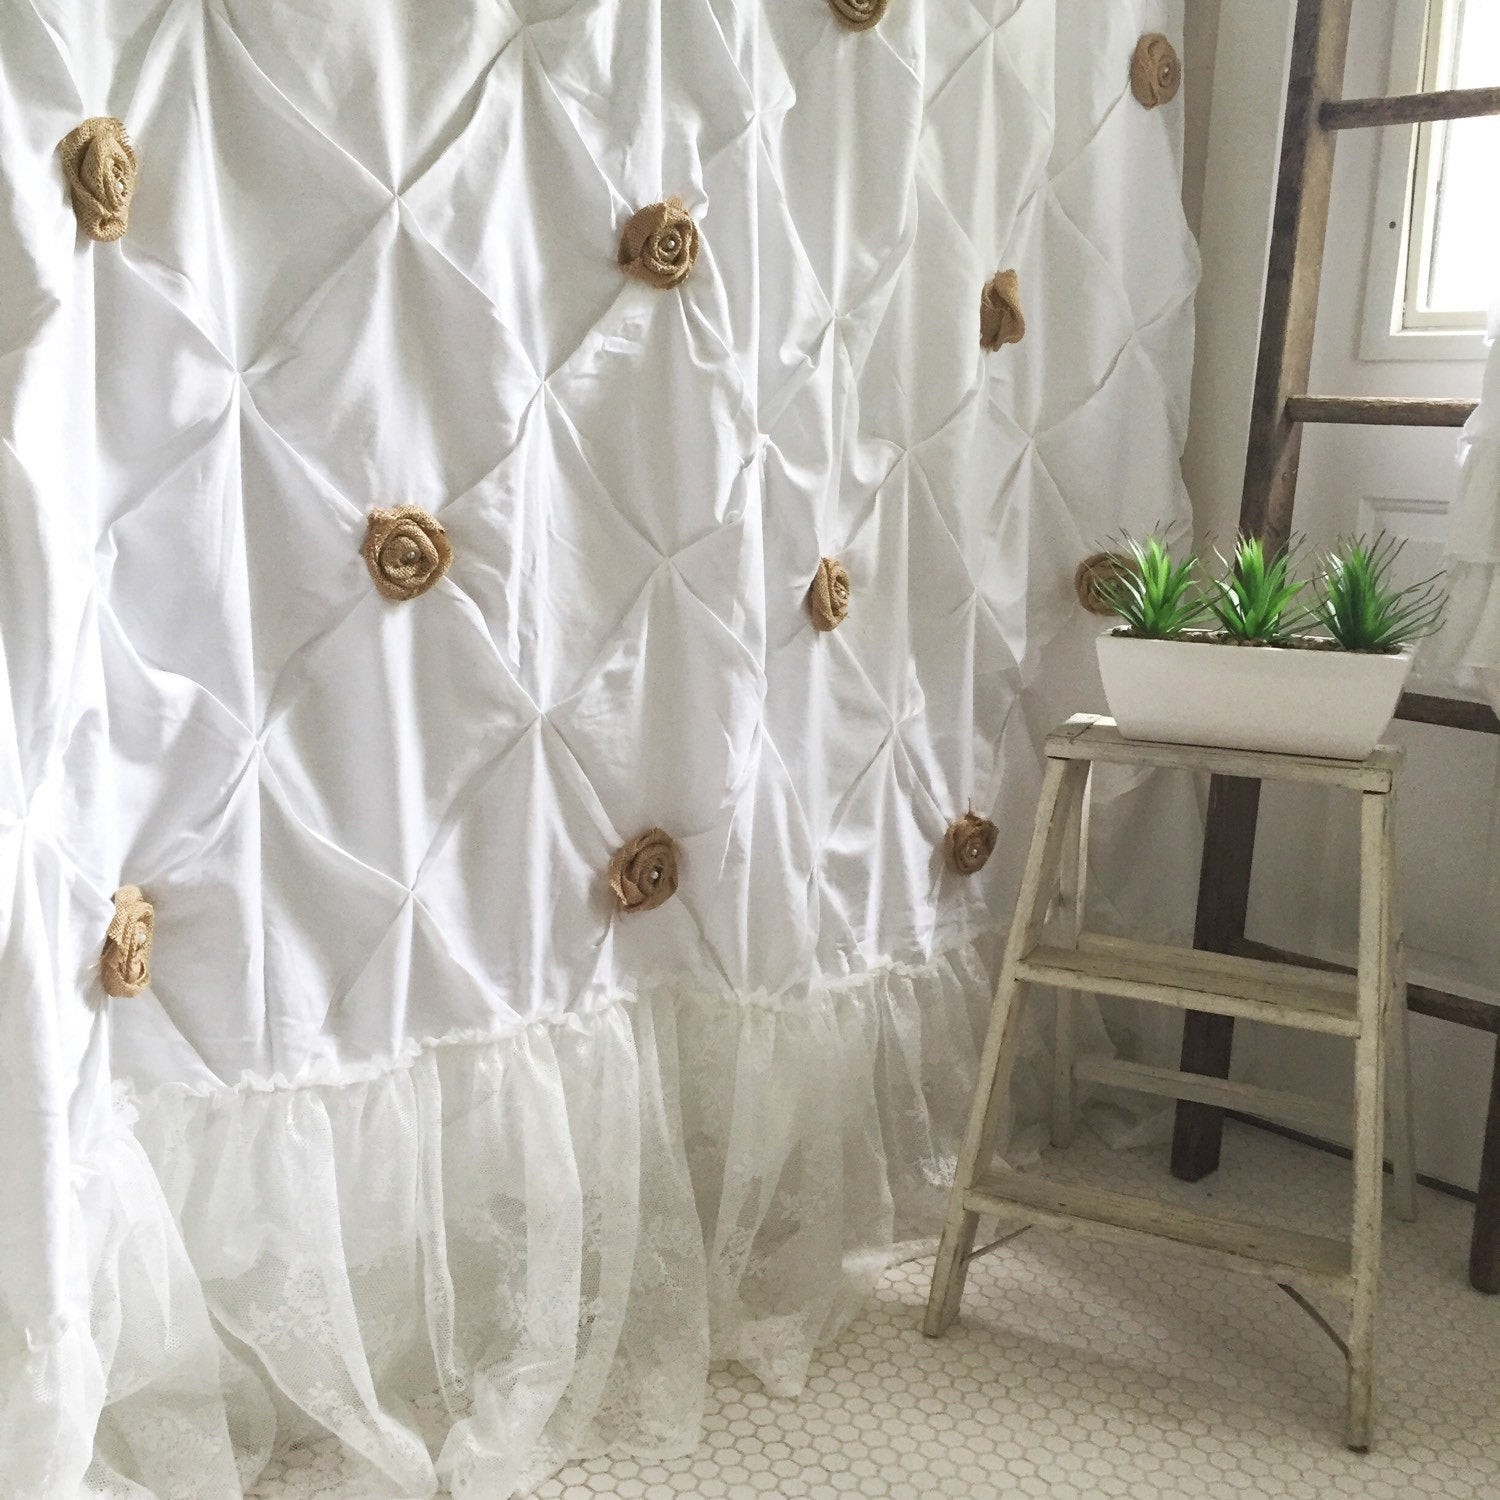 Shabby chic shower curtain extra long white pin tuck with